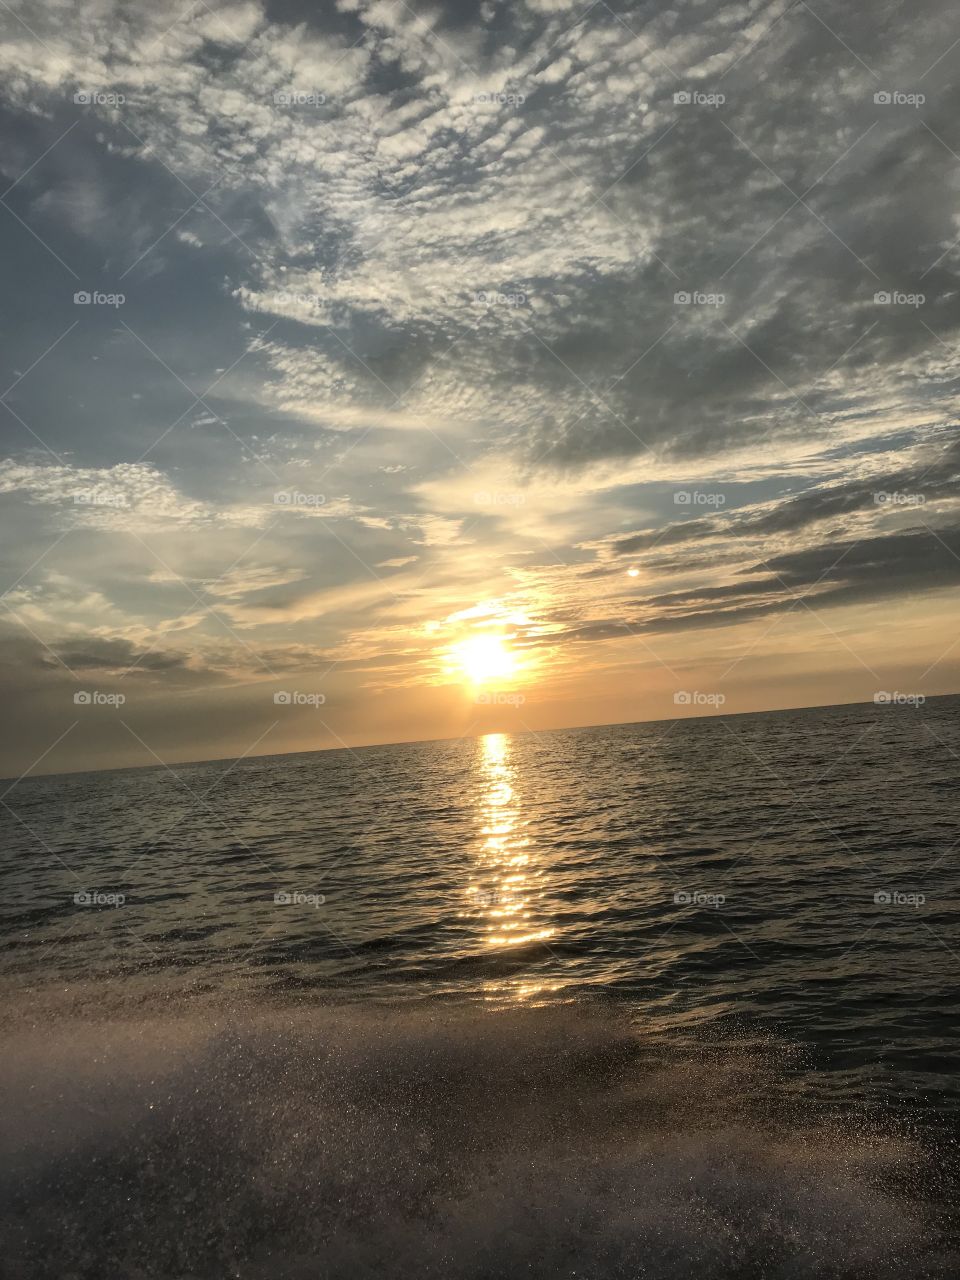 Off shore ocean fishing trip with a beautiful sunset 